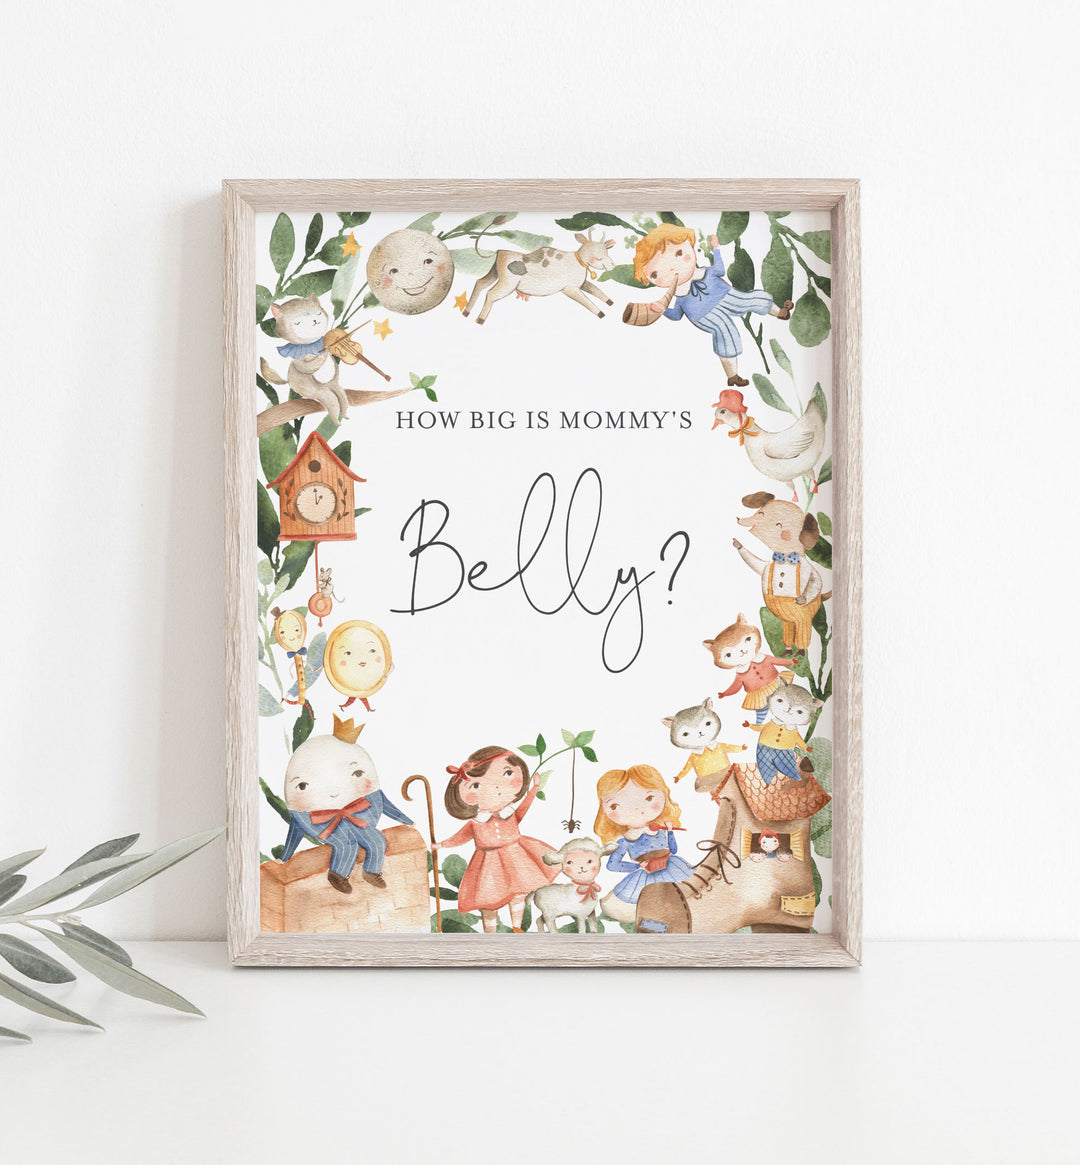 Nursery Rhymes Baby Shower How Big Is Mummy's Belly Game Printable